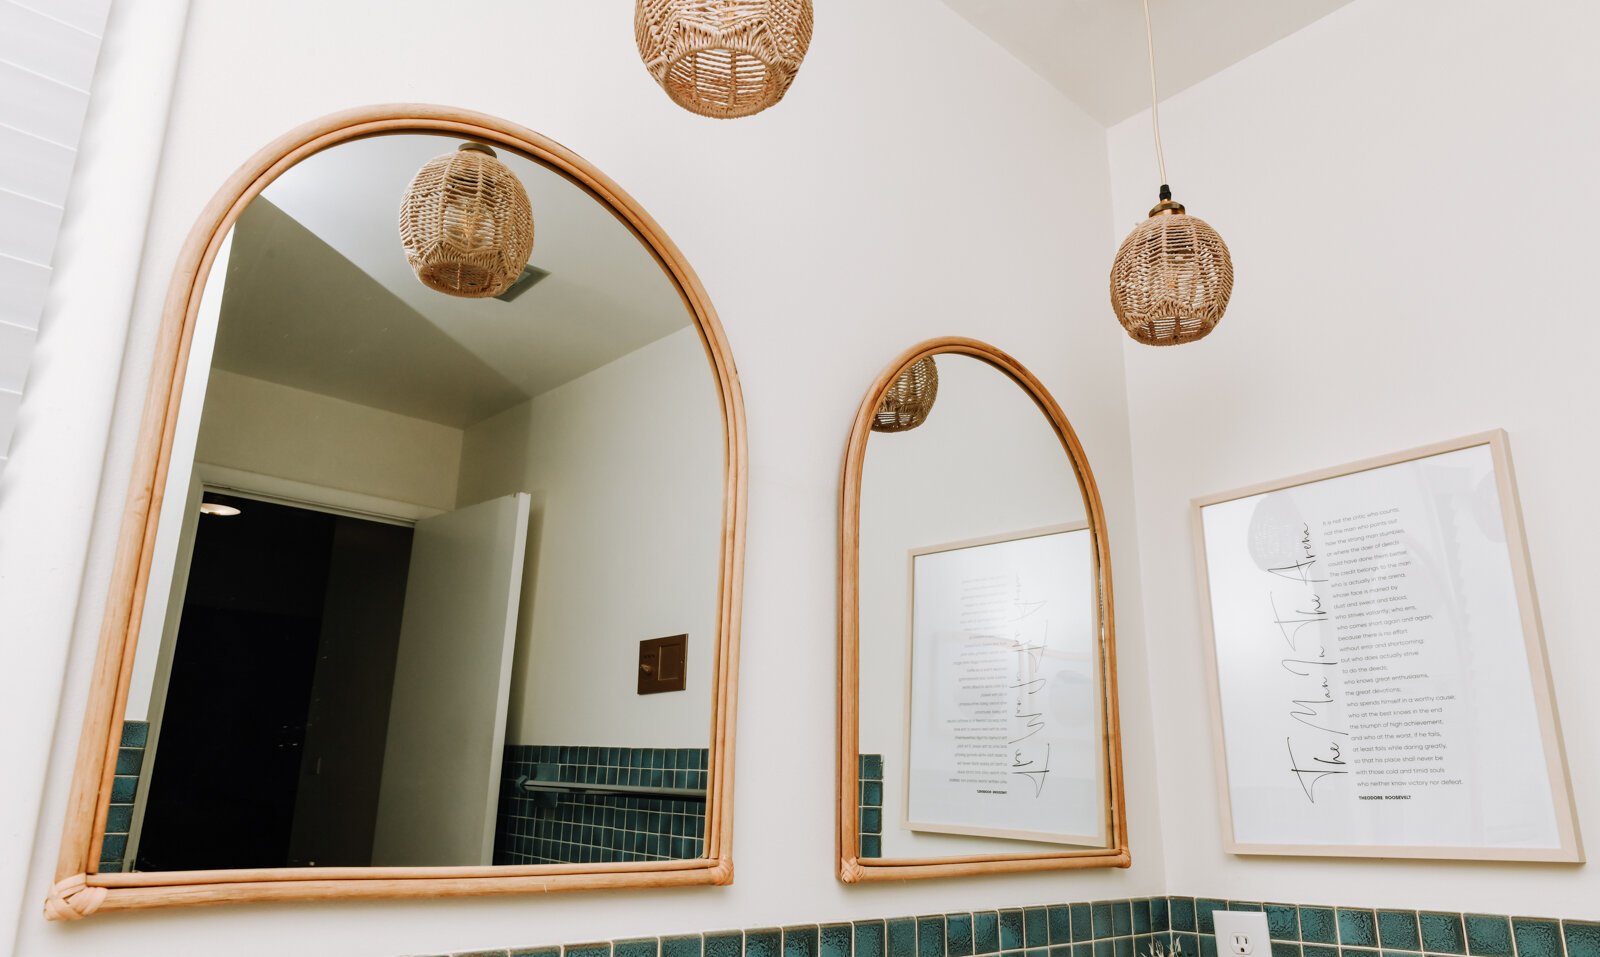 The main bathroom features gold and green tones, mirrors and original tile.